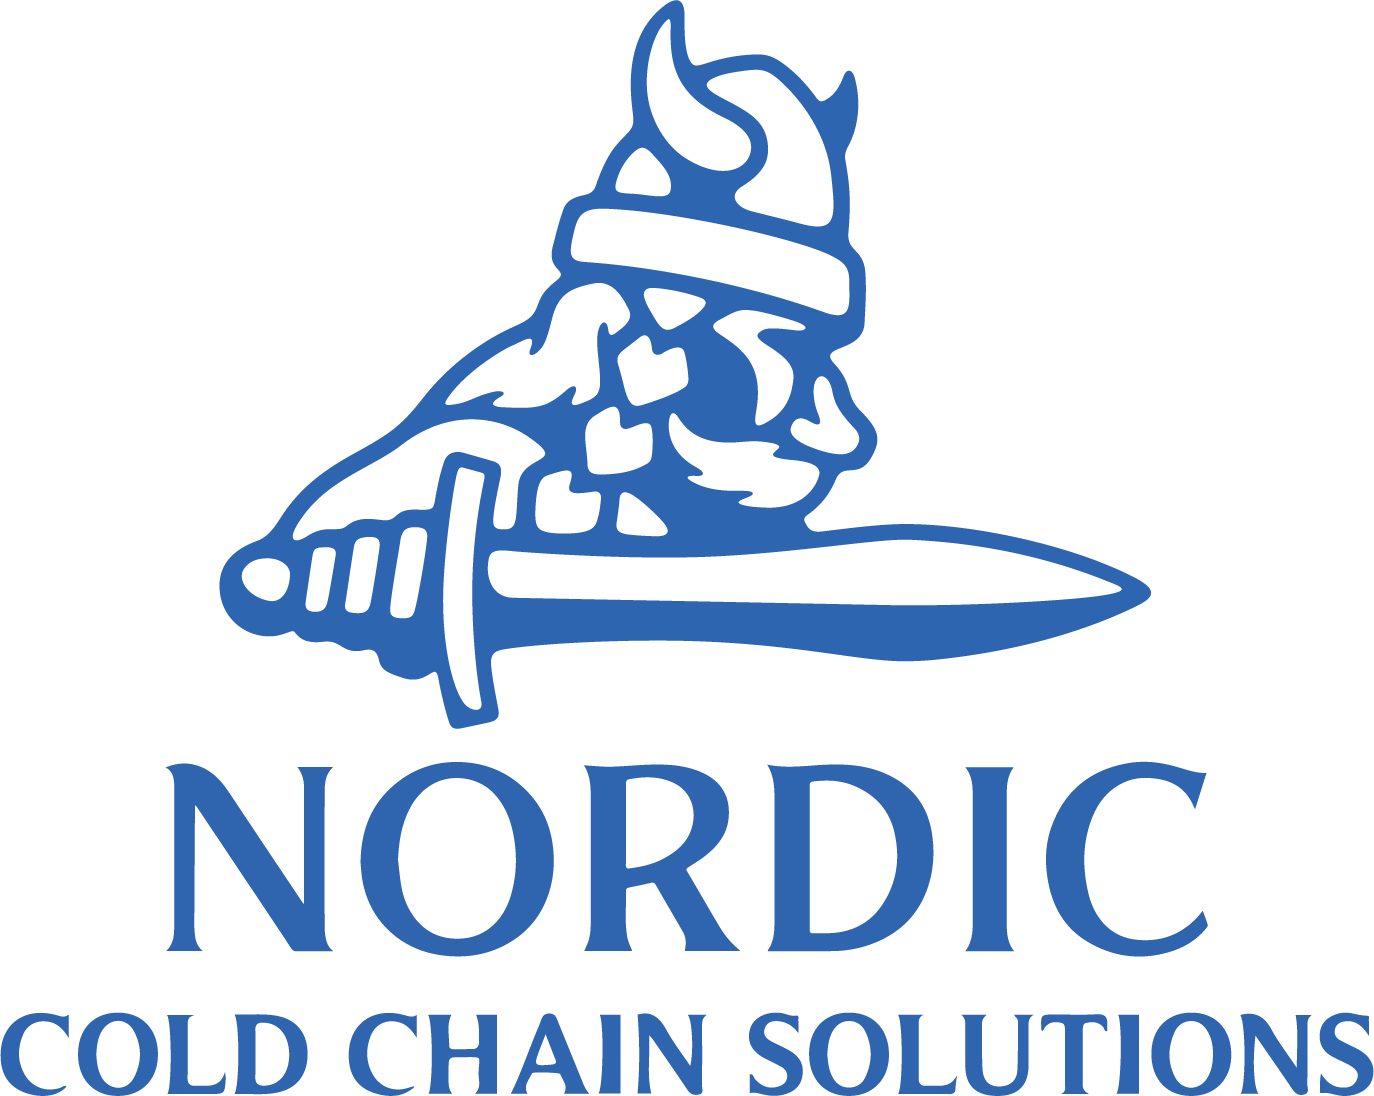 https://nordiccoldchain.com/wp-content/uploads/2019/07/Nordic-Cold-Chain-Solutions-Blue-2.png